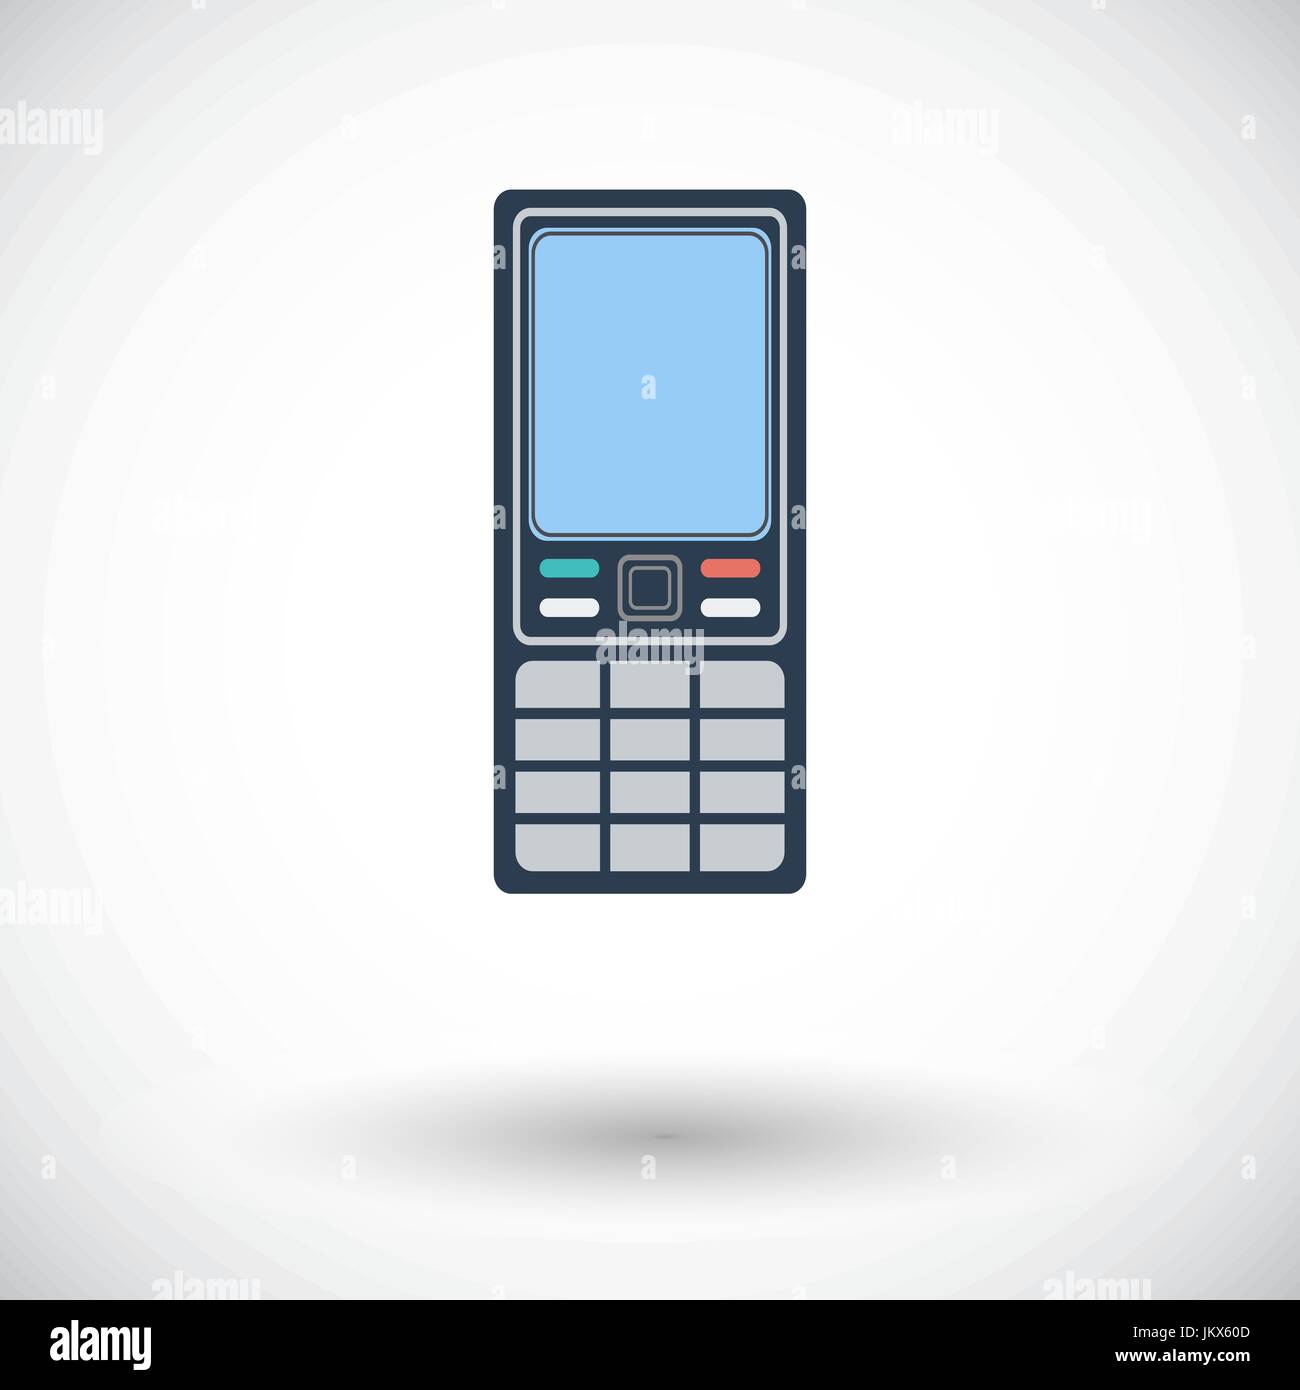 Phone Buttons PNG Image, Black Button Phone Illustration, Mobile Phone,  Button Mobile Phone, Cartoon Mobile Phone Illustration PNG Image For Free  Download